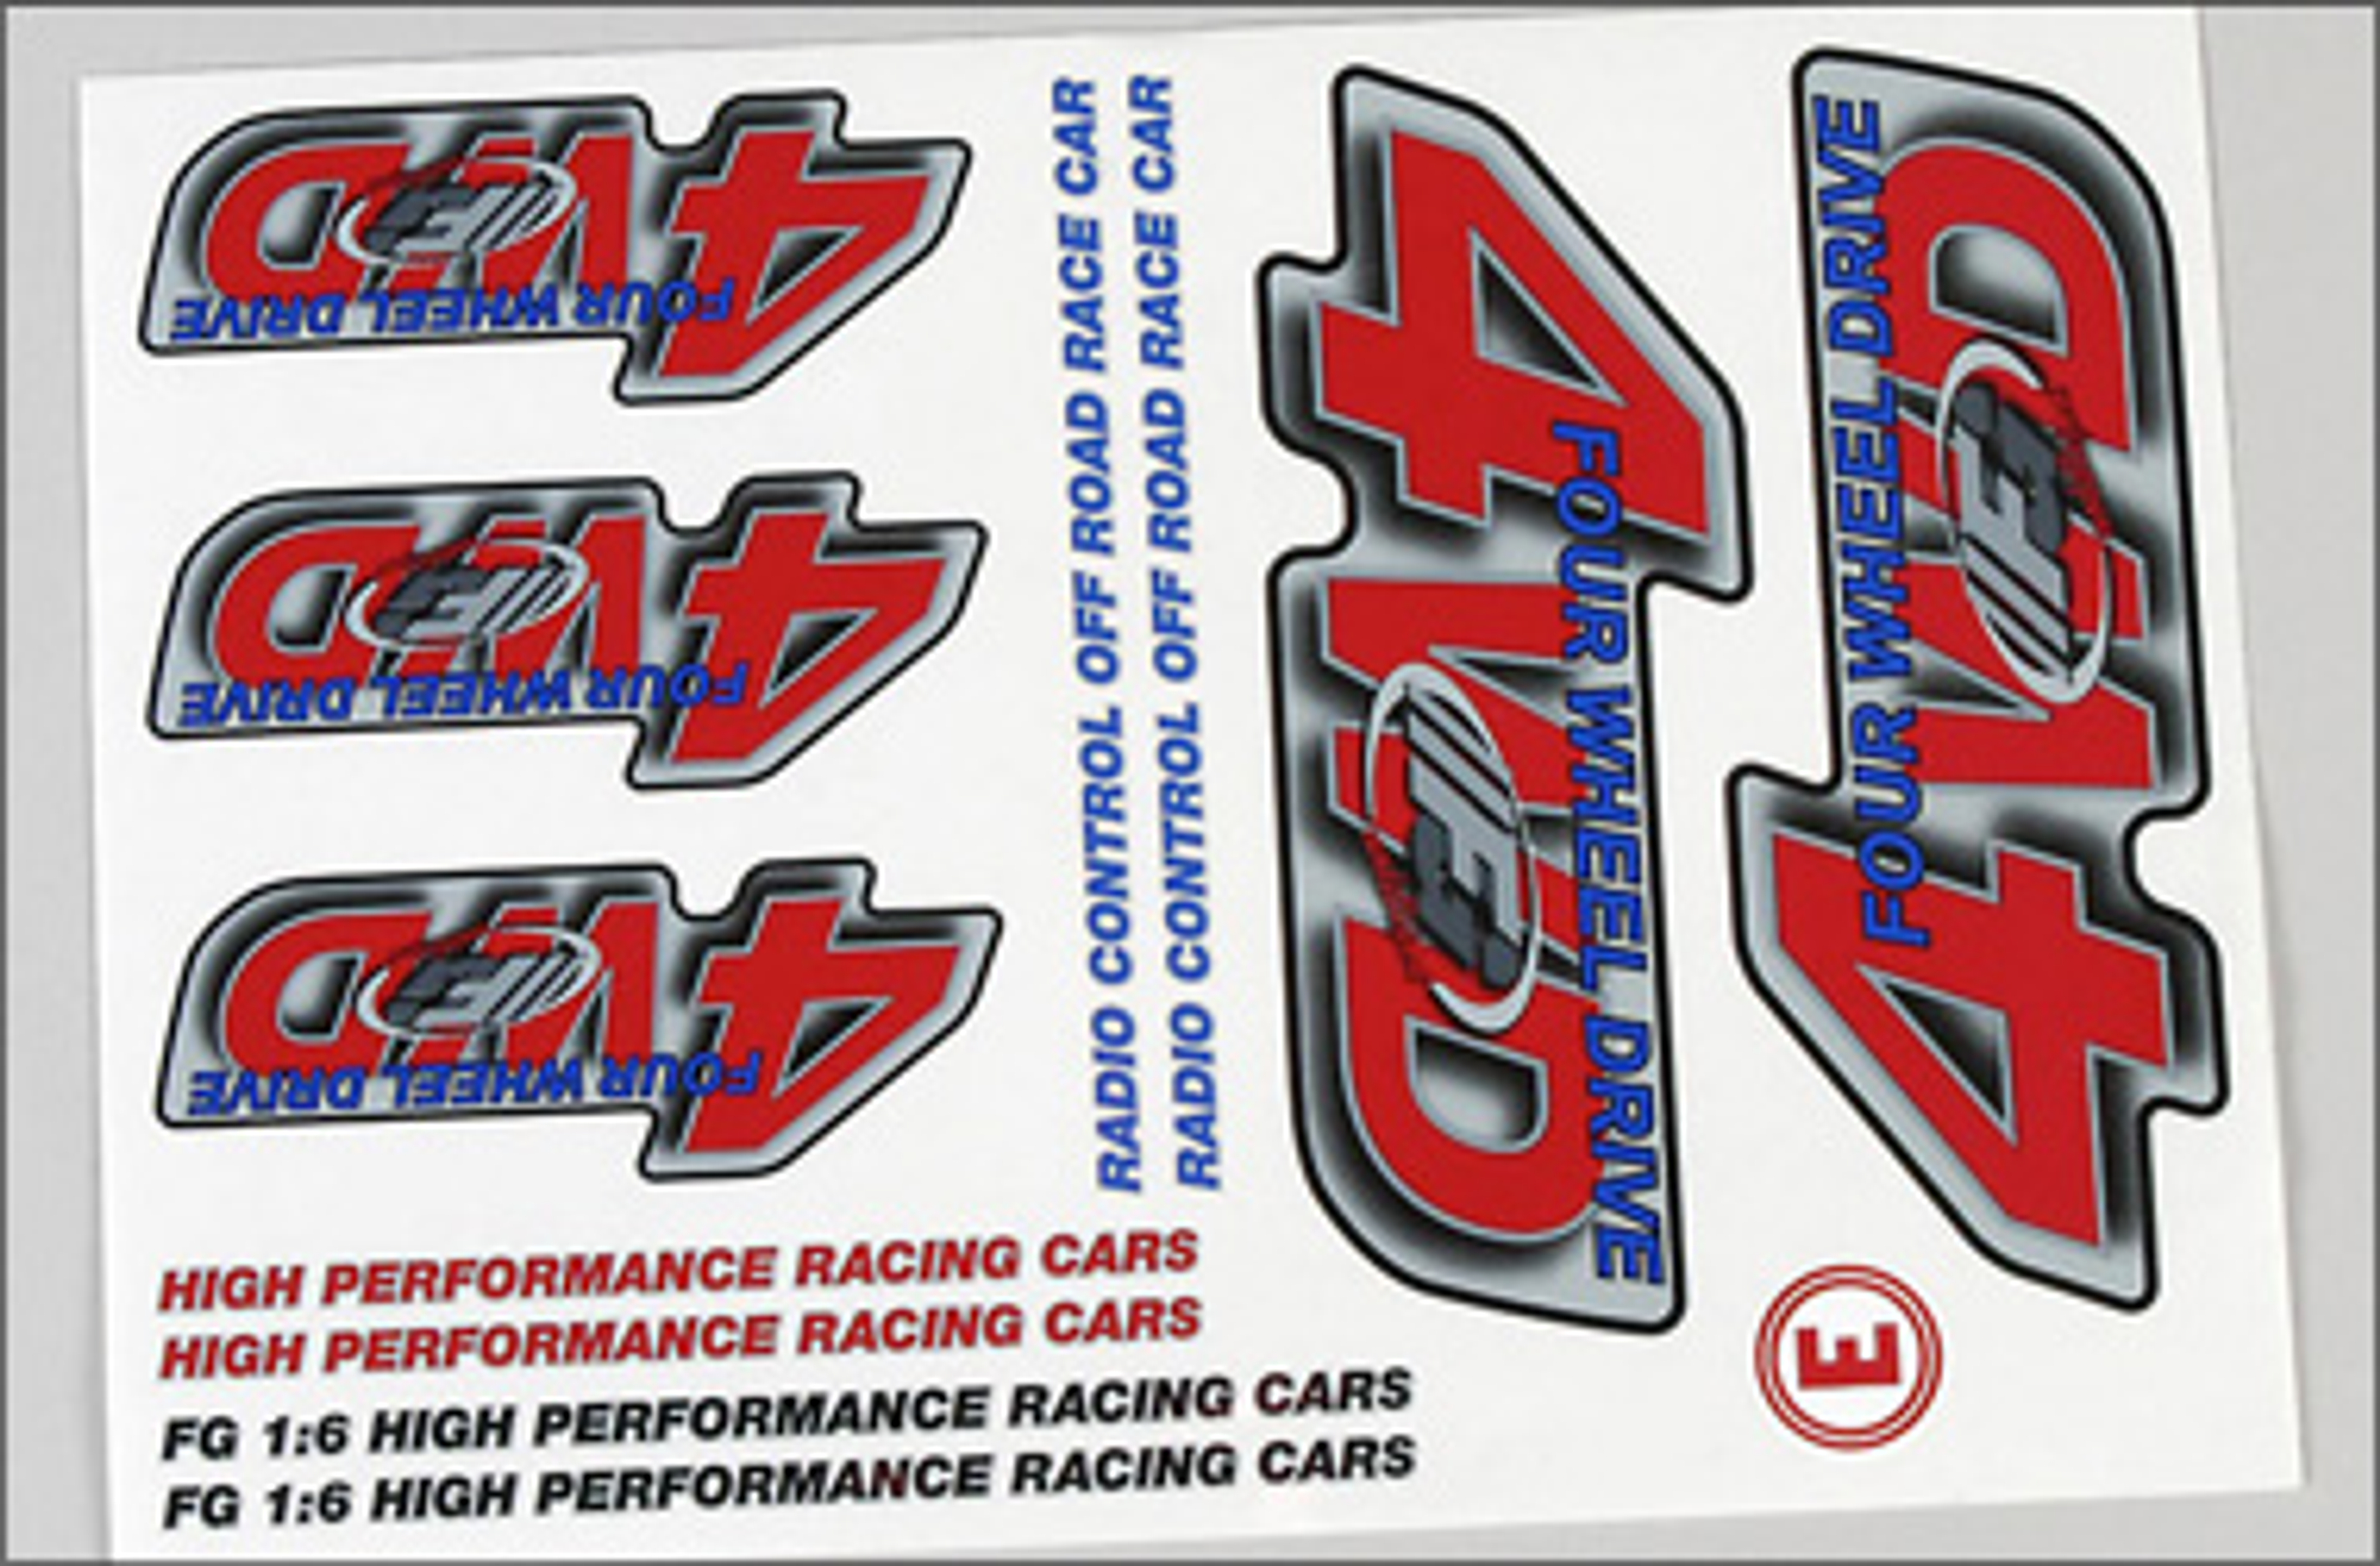 58155 FG 4 WD team decals for Monst./Stadium models, 1 pce.